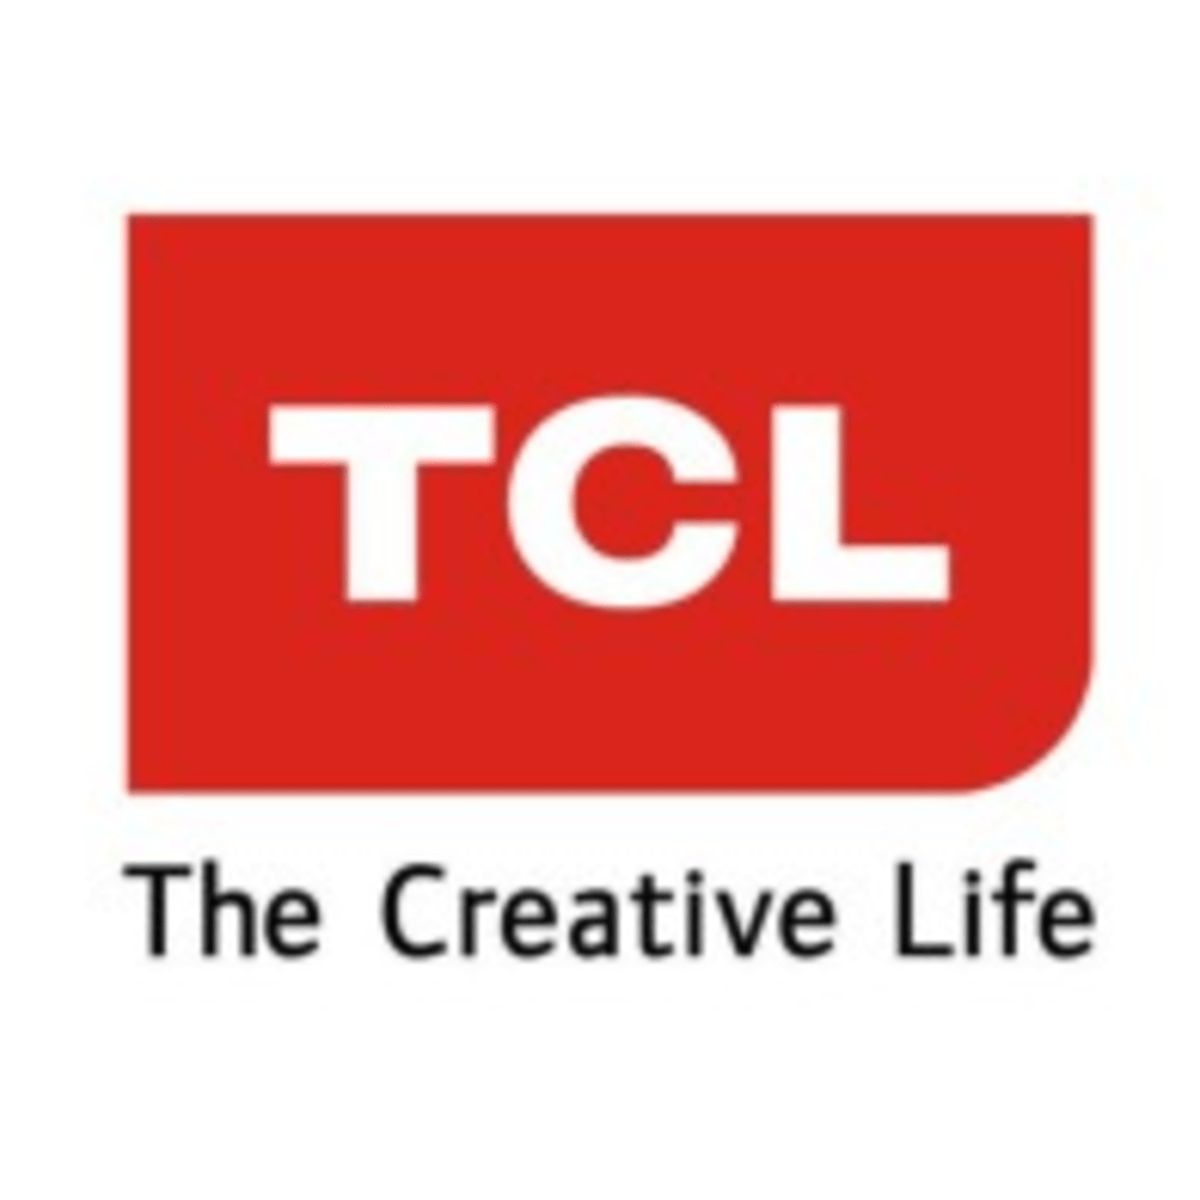 QD Logo - TCL Releases QD TV Line In China - Twice